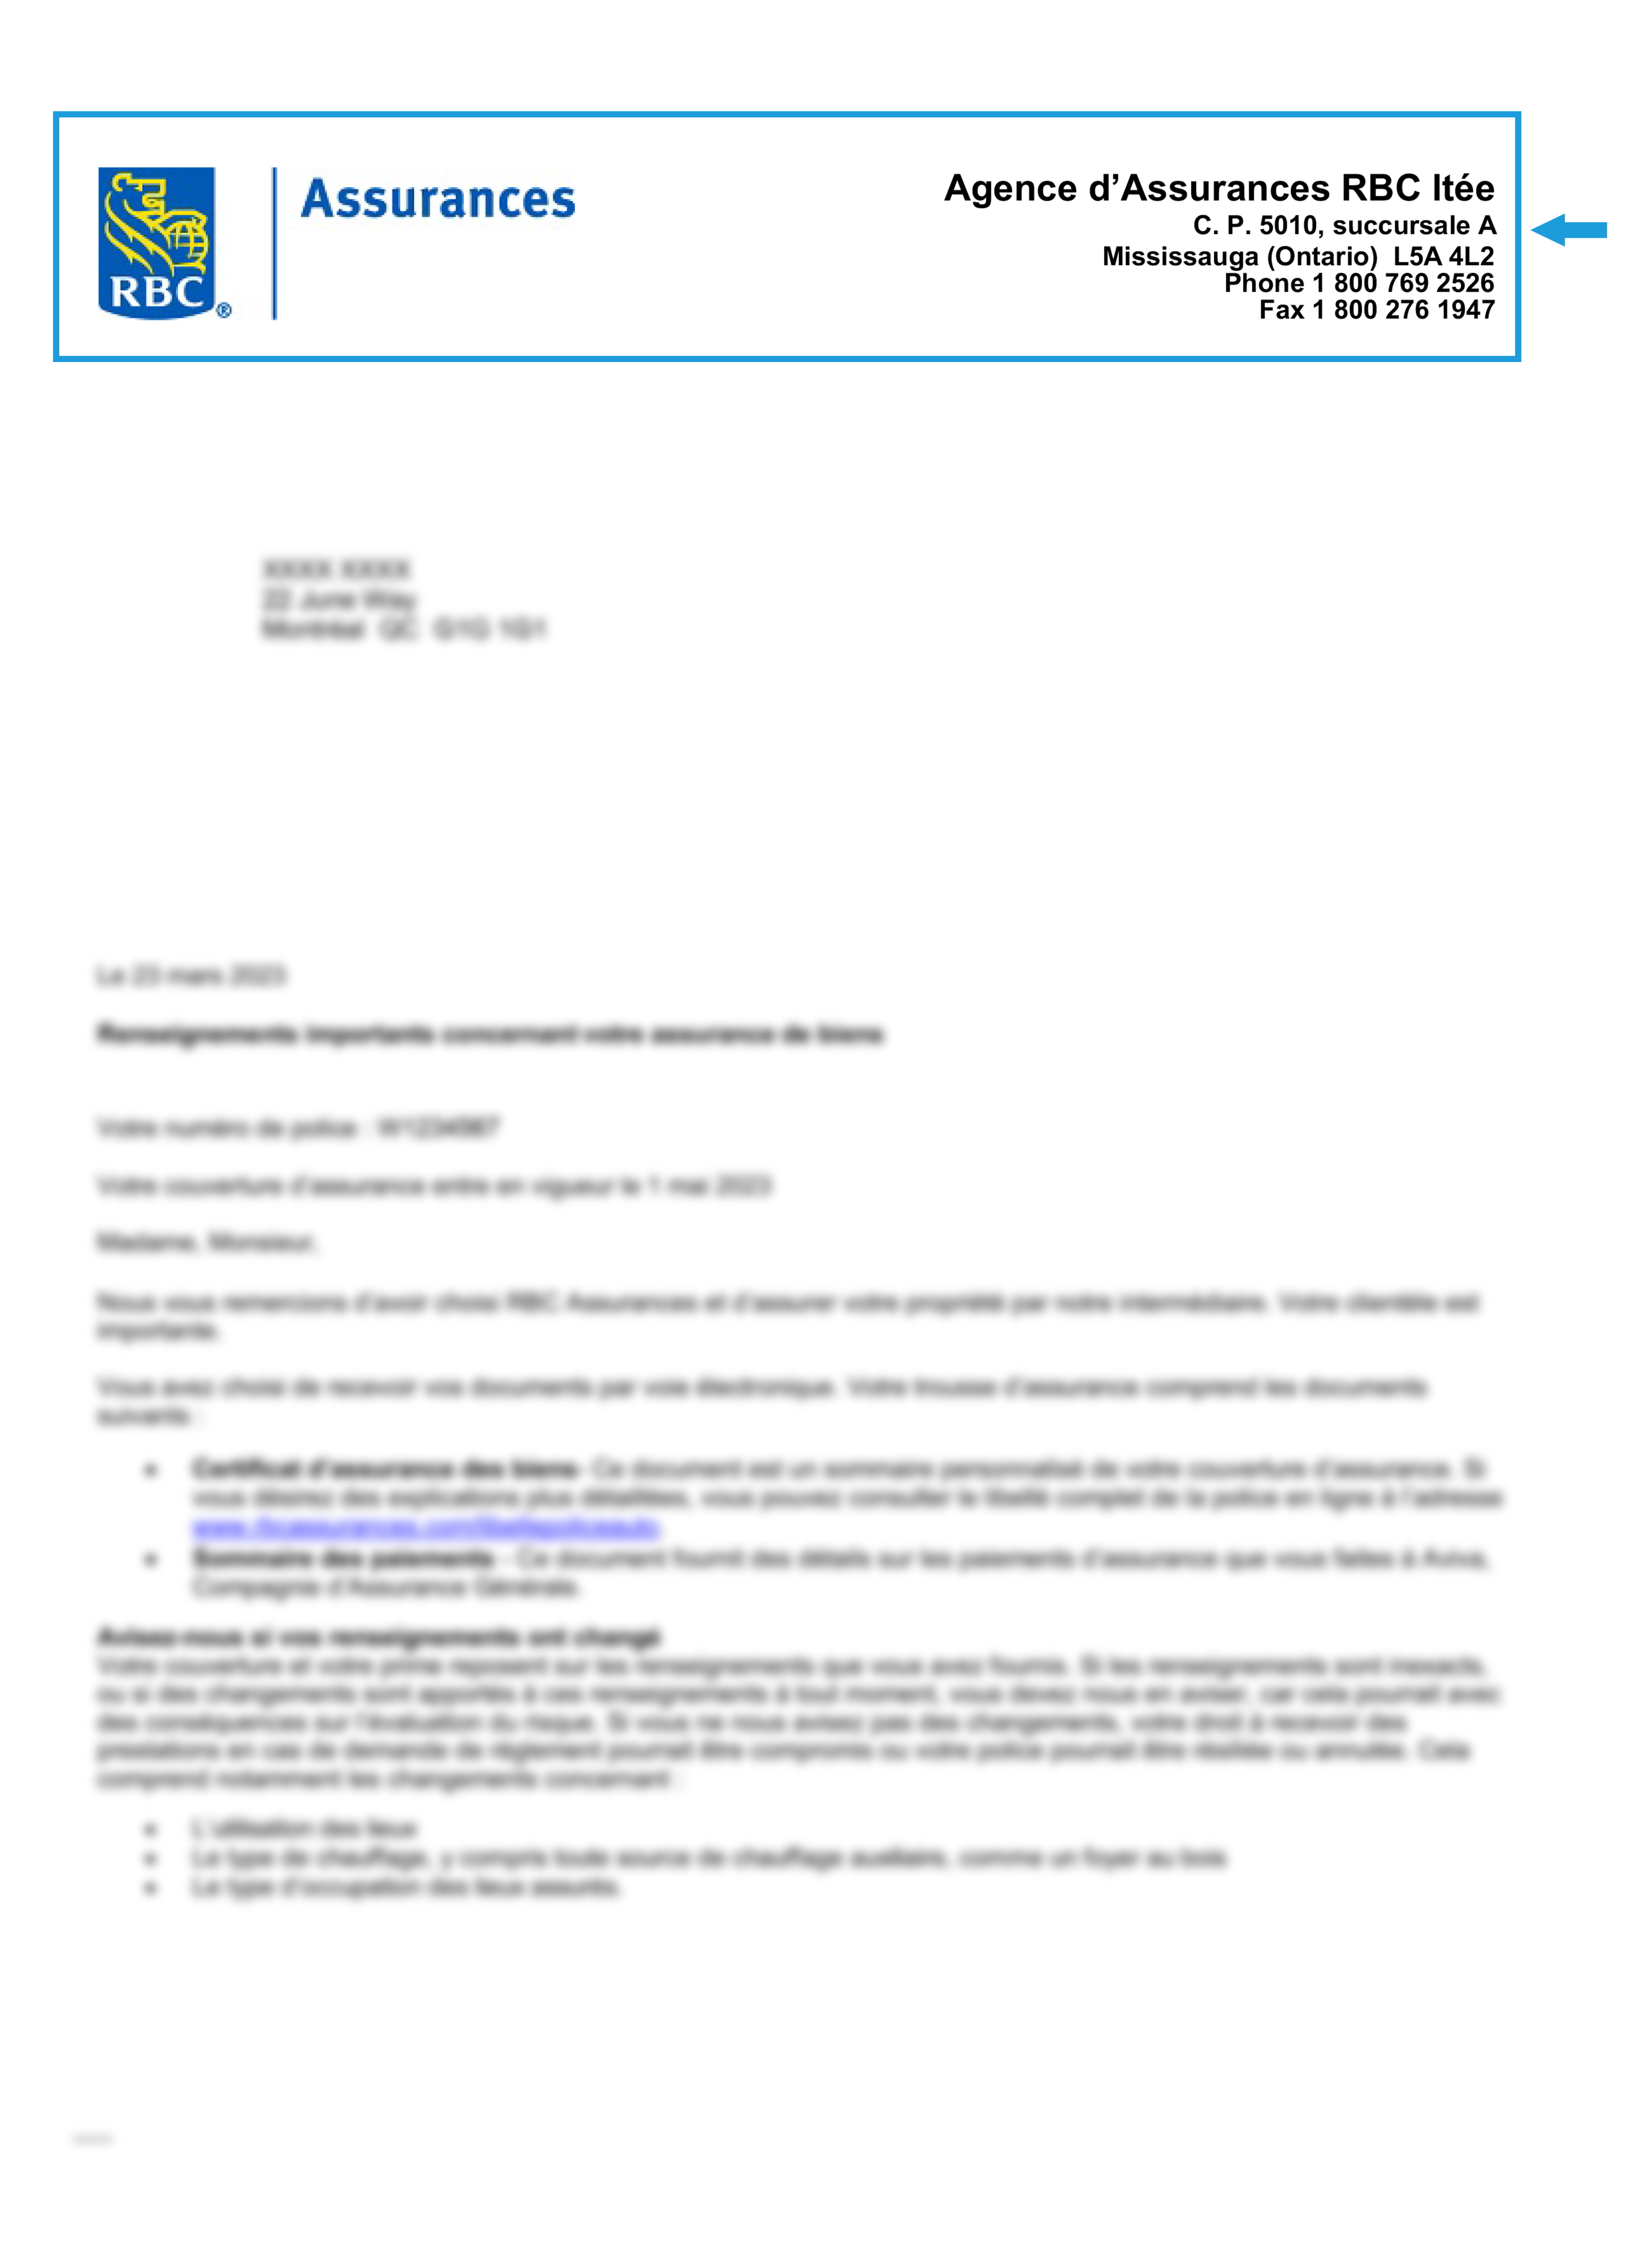 Blurred RBC Insurance policy document highlighting letterhead